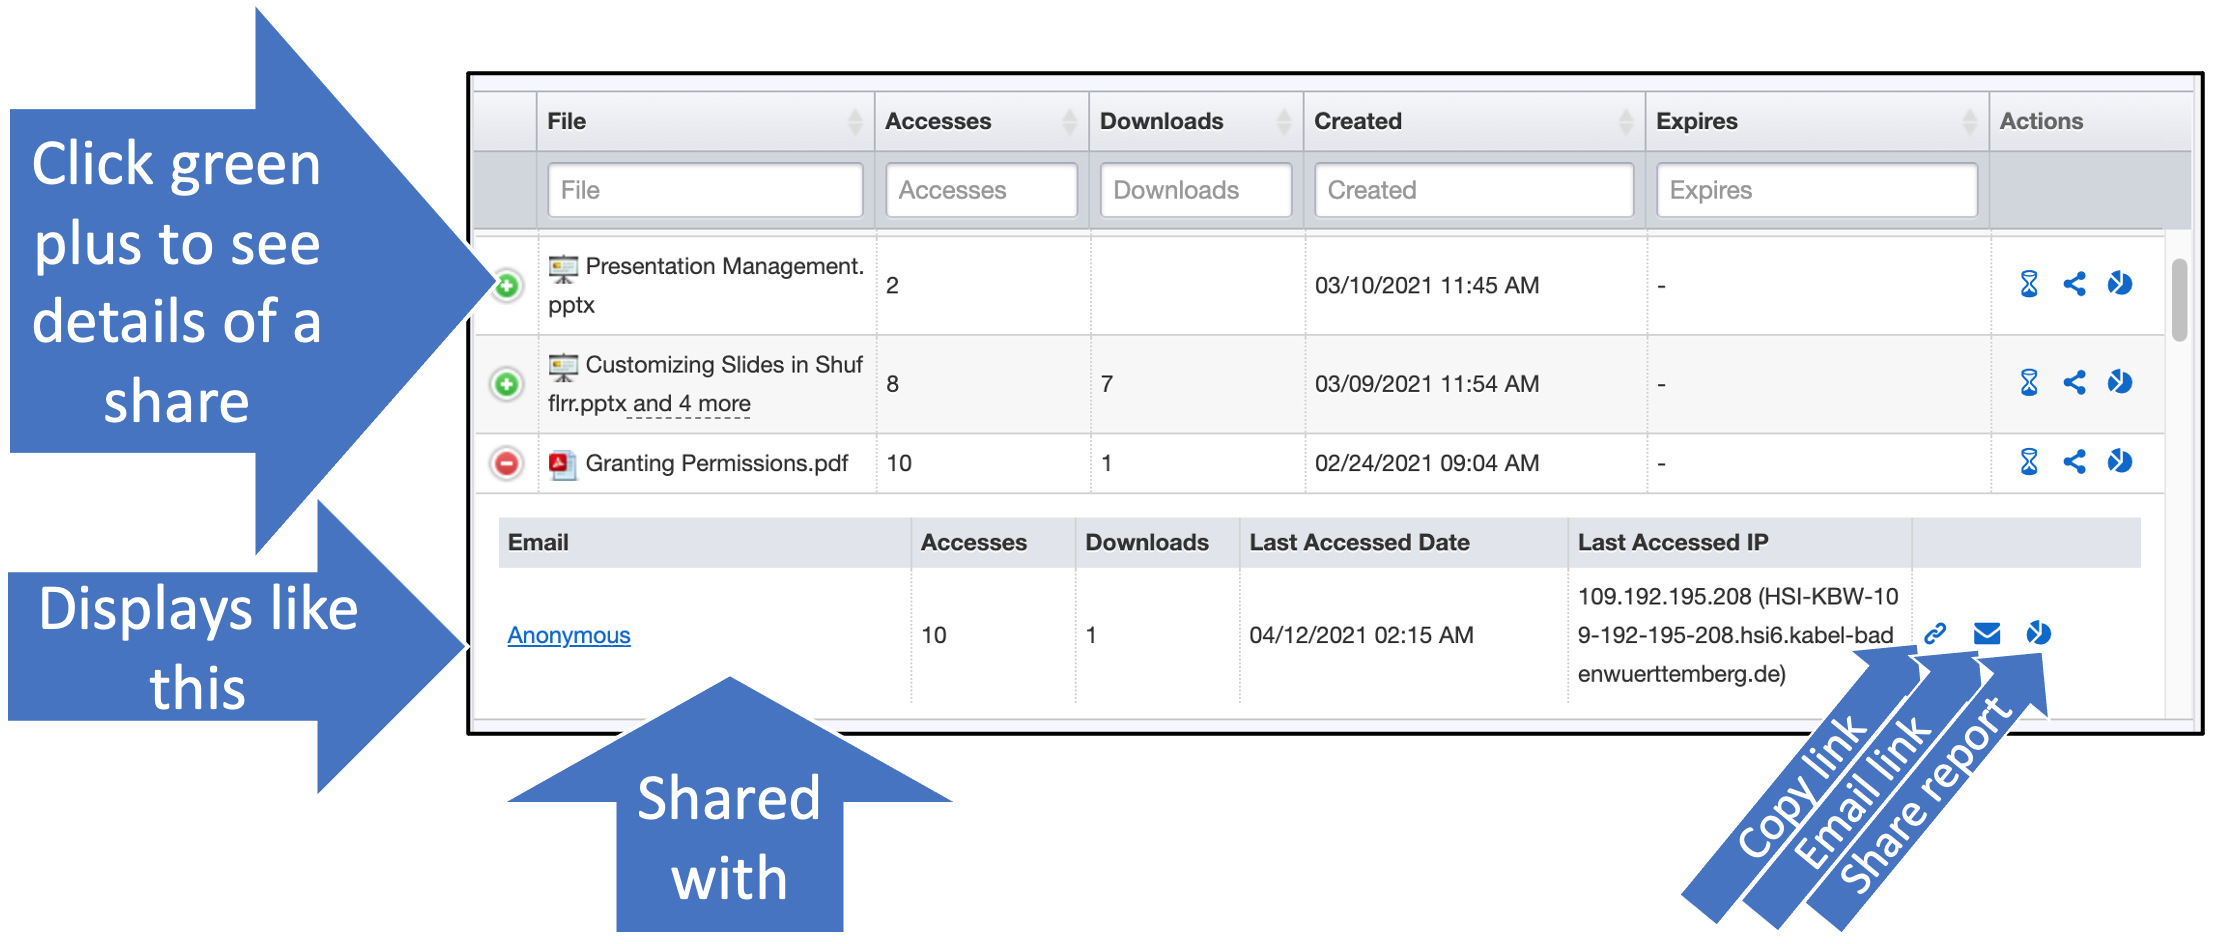 Viewing details of user share activity